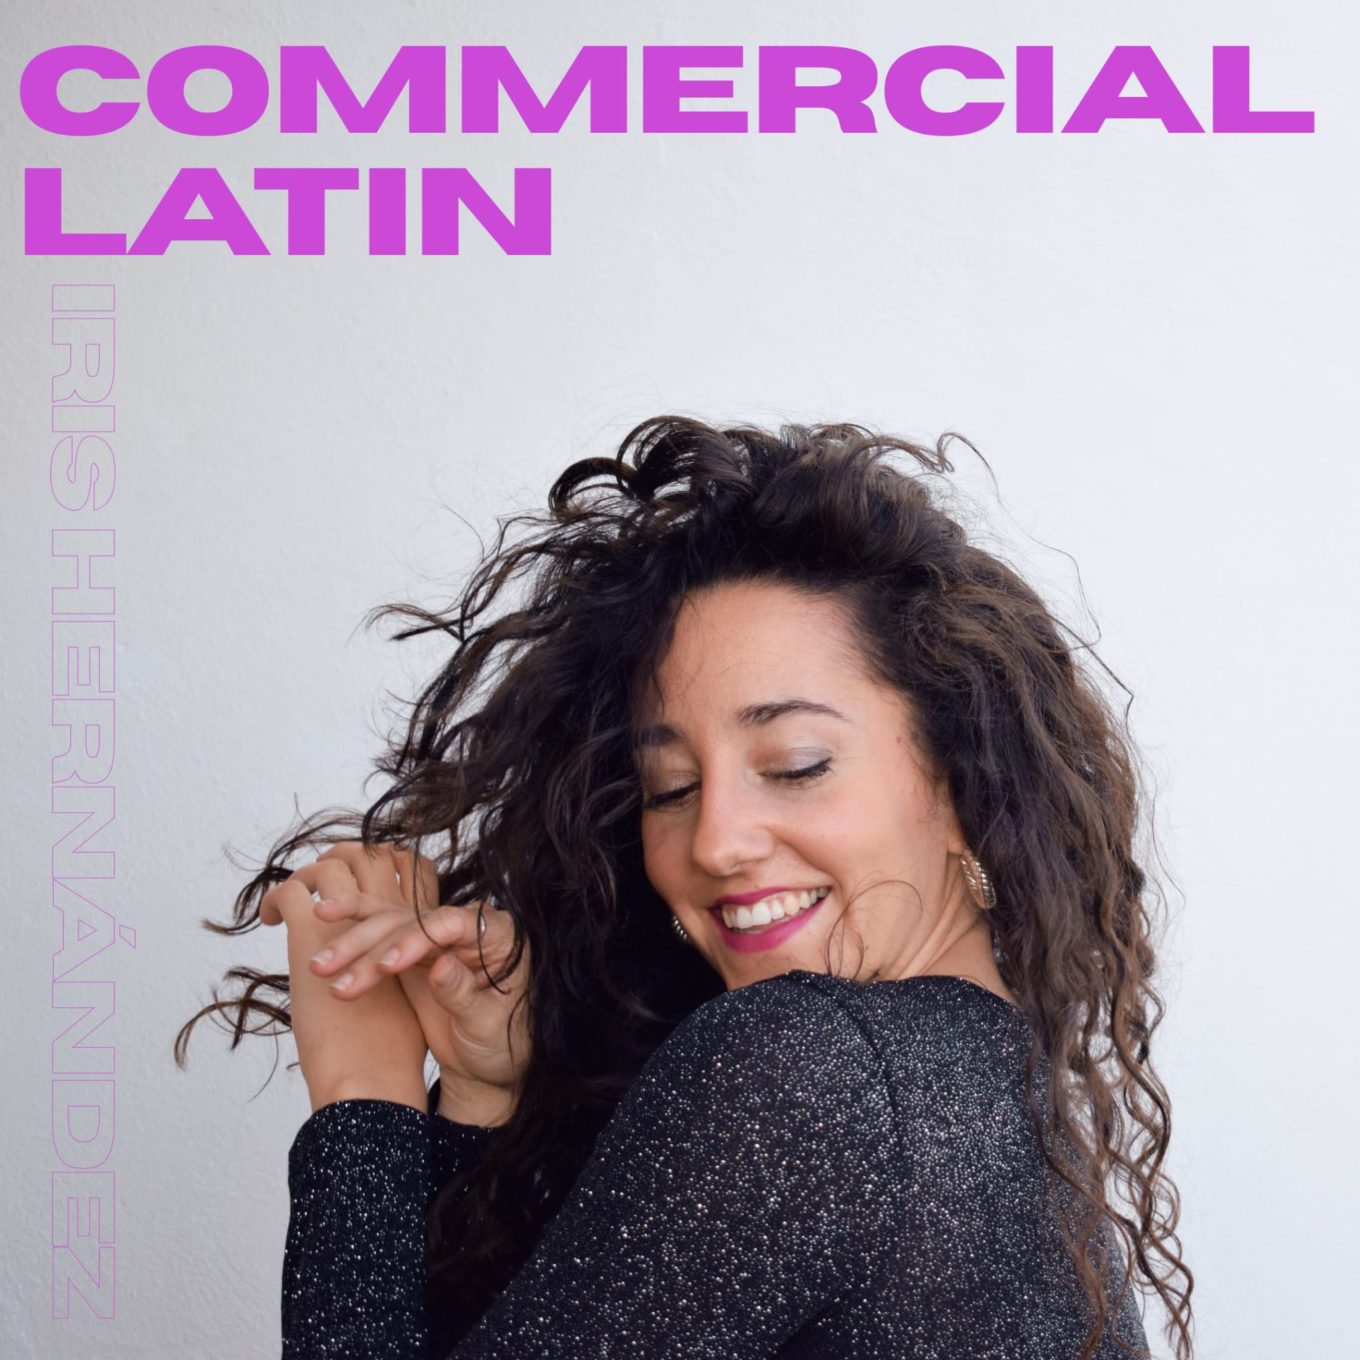 Poster design for commercial latin beginners dance class featuring headshot of a curly haired lady smiling